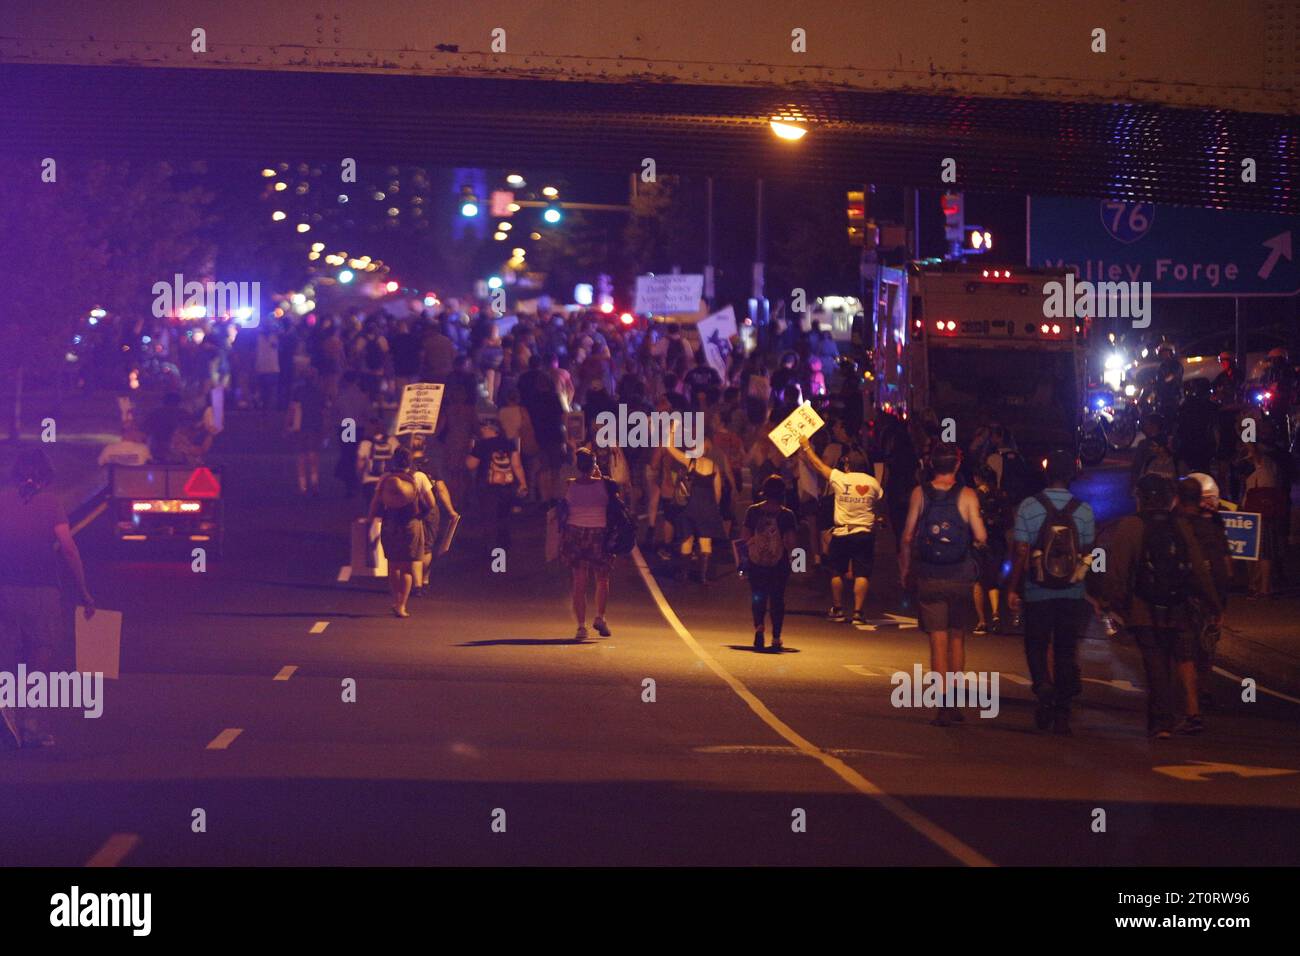 07252016 - Philadelphia, Pennsylvania, USA: Protesters outside DNC after Bernie Sanders talks after Hillary Clinton gets the nomination for president during roll call on the second day of the Democratic National Convention. (Jeremy Hogan/Polaris) Stock Photo